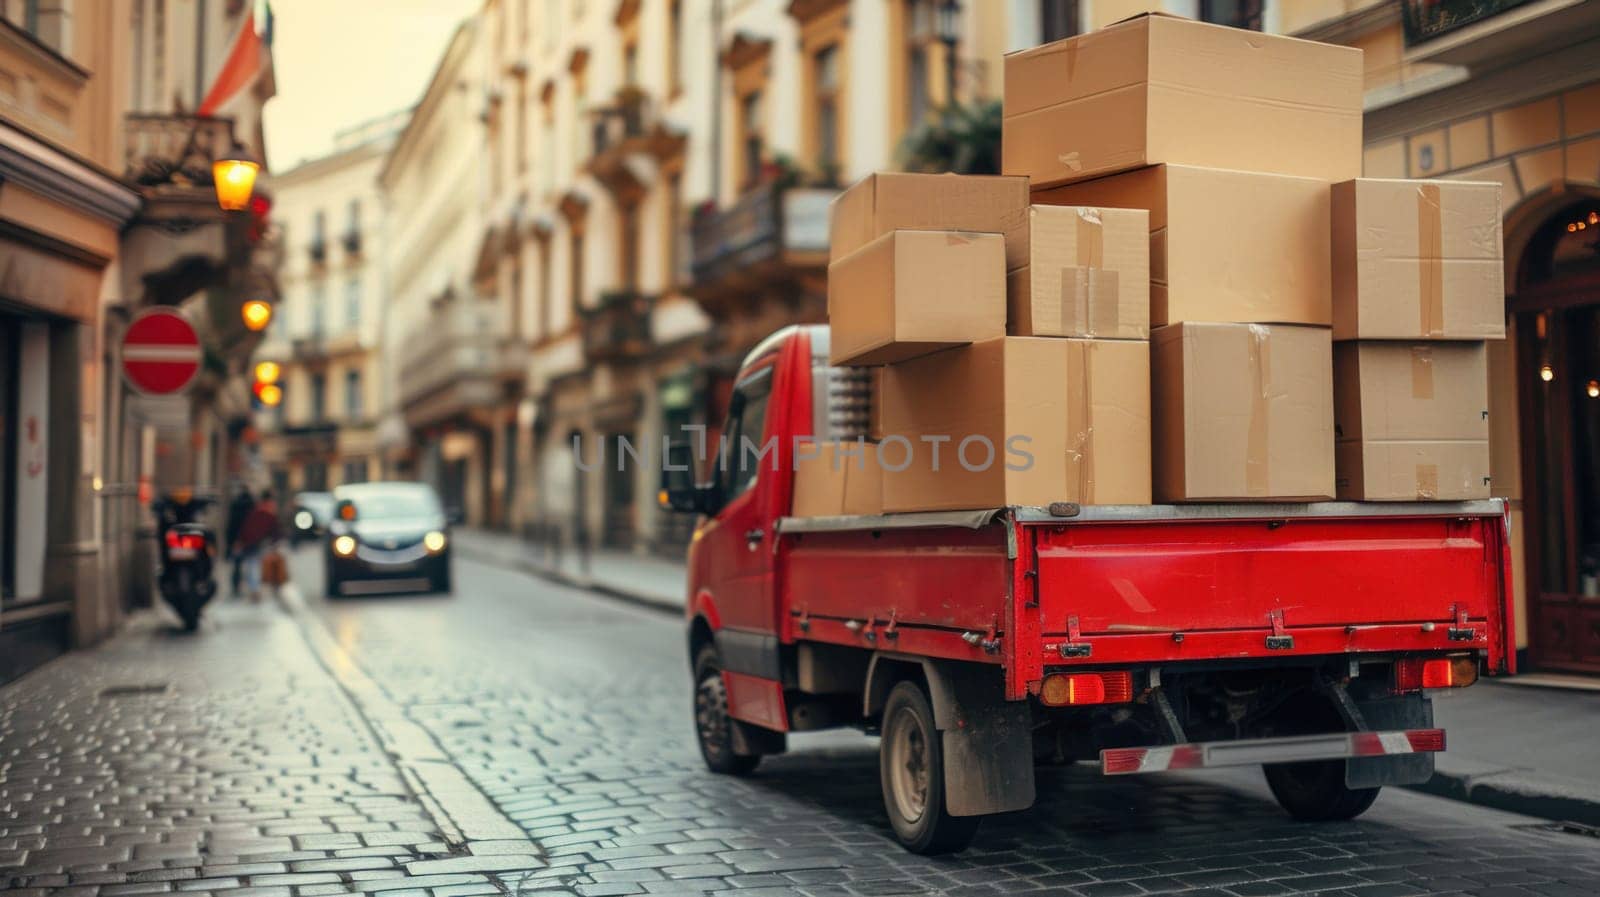 A red truck is parked on a city street with a large number of boxes stacked on truck.